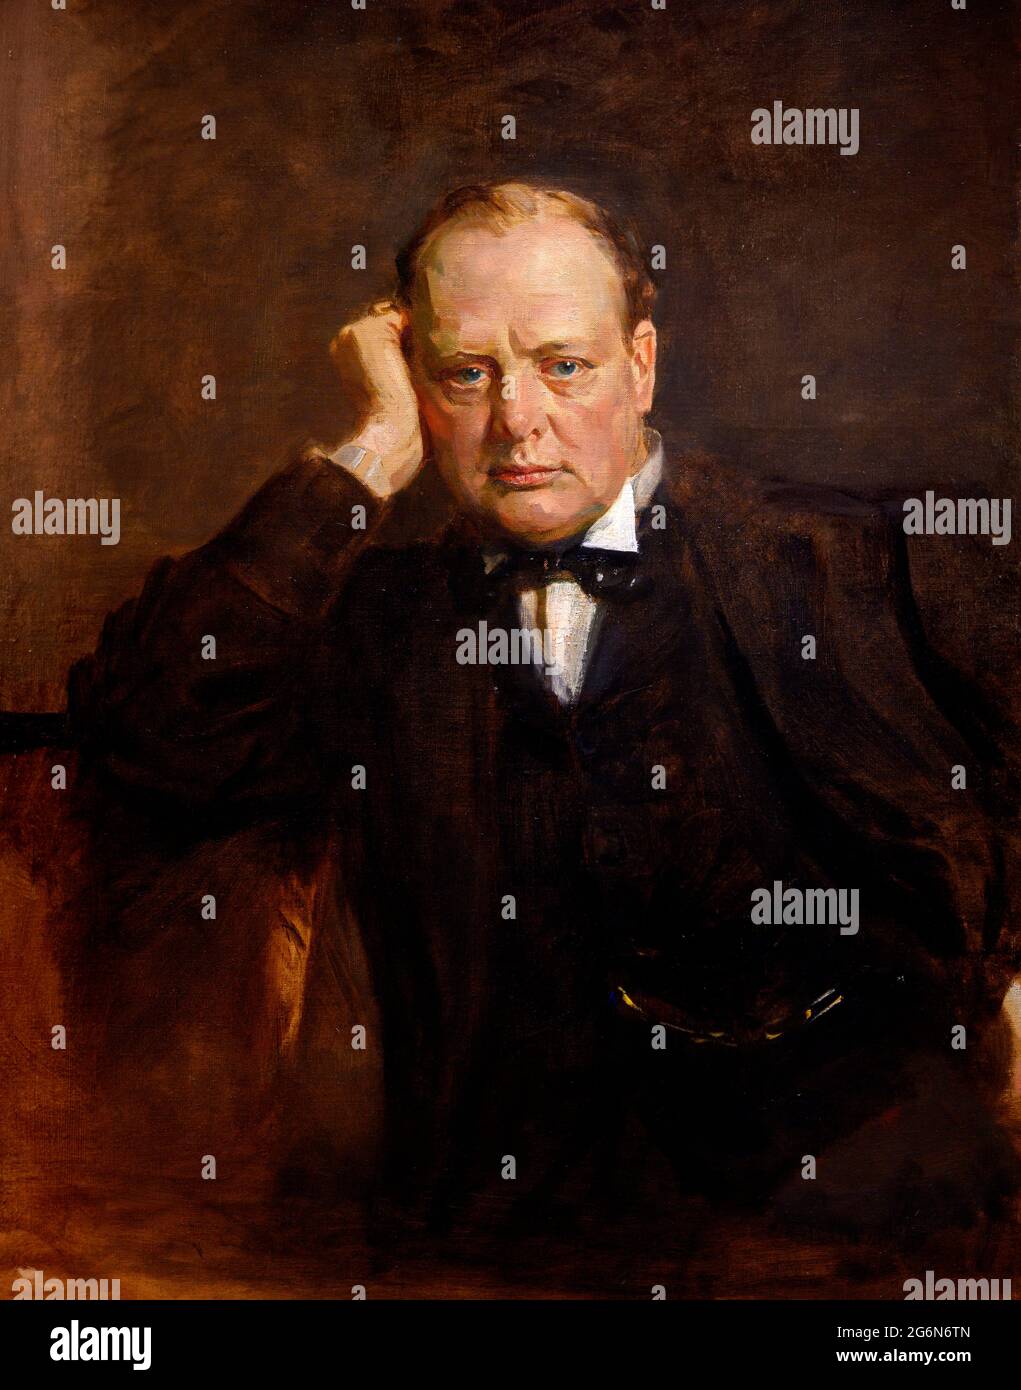 Winston Churchill. Portrait painting of British Prime Minister Sir Winston Churchill (1874-1965) by Sir James Guthrie (1859-1930), oil on canvas, c.1919-21 Stock Photo